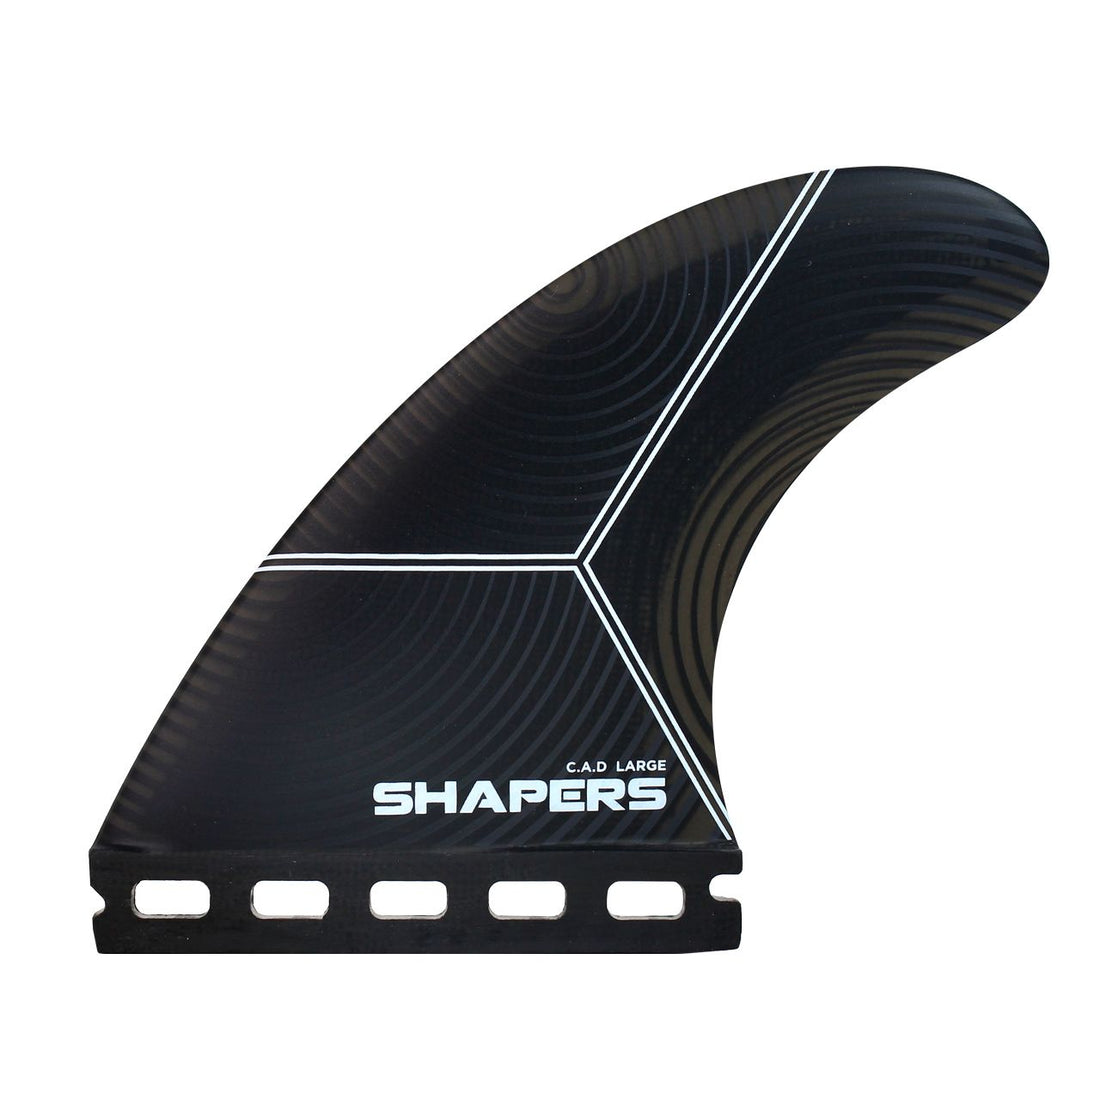 SHAPERS C.A.D LARGE 3-FIN Single Tab Base